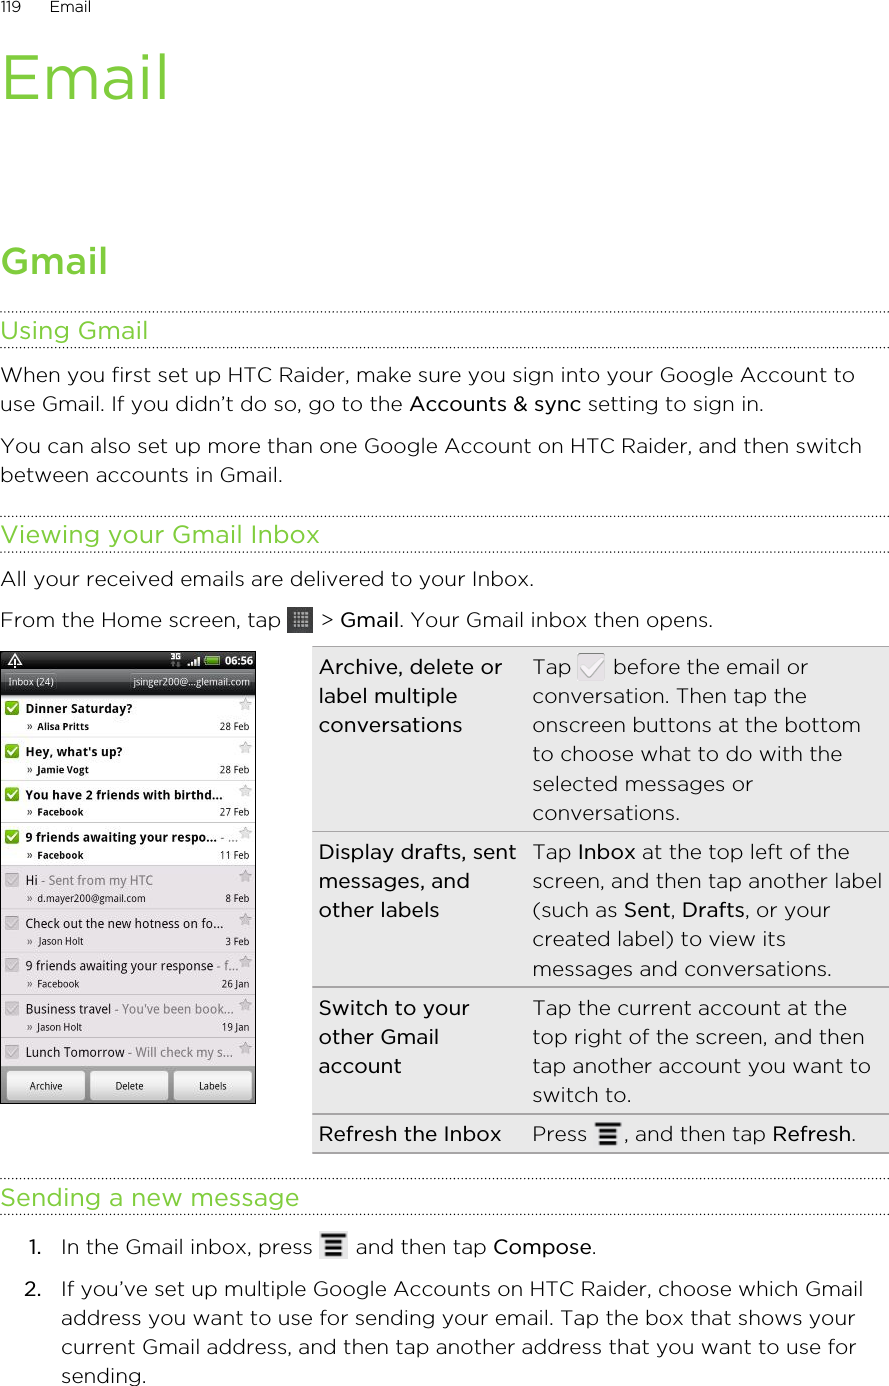 EmailGmailUsing GmailWhen you first set up HTC Raider, make sure you sign into your Google Account touse Gmail. If you didn’t do so, go to the Accounts &amp; sync setting to sign in.You can also set up more than one Google Account on HTC Raider, and then switchbetween accounts in Gmail.Viewing your Gmail InboxAll your received emails are delivered to your Inbox.From the Home screen, tap   &gt; Gmail. Your Gmail inbox then opens.Archive, delete orlabel multipleconversationsTap   before the email orconversation. Then tap theonscreen buttons at the bottomto choose what to do with theselected messages orconversations.Display drafts, sentmessages, andother labelsTap Inbox at the top left of thescreen, and then tap another label(such as Sent, Drafts, or yourcreated label) to view itsmessages and conversations.Switch to yourother GmailaccountTap the current account at thetop right of the screen, and thentap another account you want toswitch to.Refresh the Inbox Press  , and then tap Refresh.Sending a new message1. In the Gmail inbox, press   and then tap Compose.2. If you’ve set up multiple Google Accounts on HTC Raider, choose which Gmailaddress you want to use for sending your email. Tap the box that shows yourcurrent Gmail address, and then tap another address that you want to use forsending.119 Email